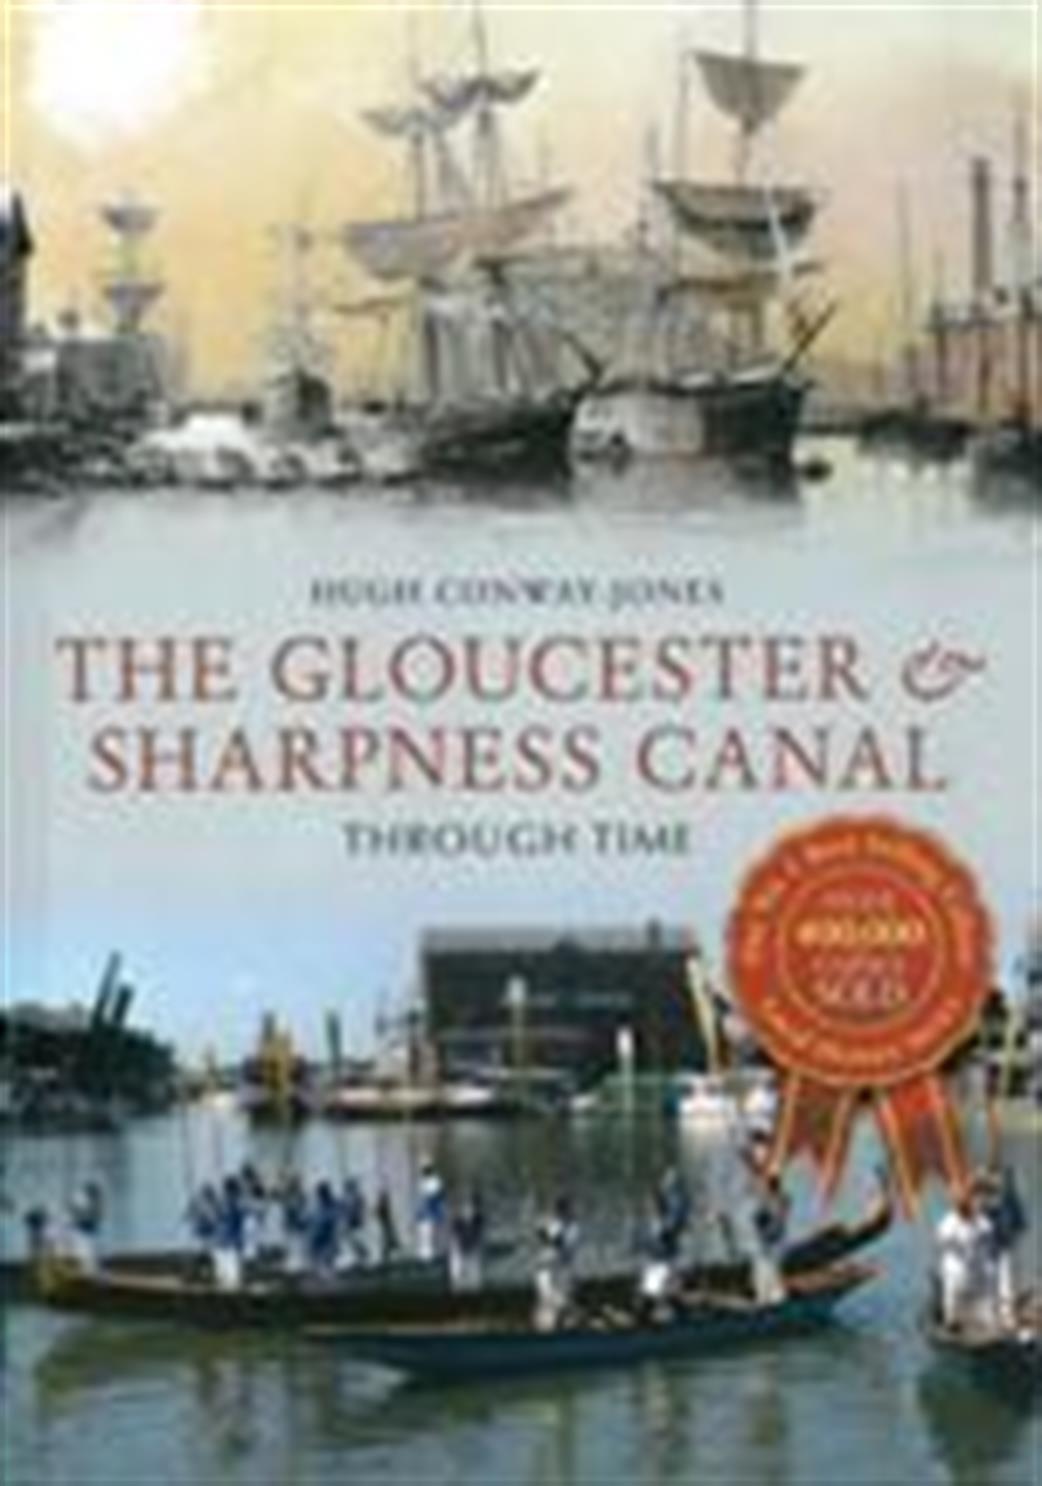 Amberley Publishing 9781445612898 Gloucester & Sharpness Canal by Hugh Conway-Jones